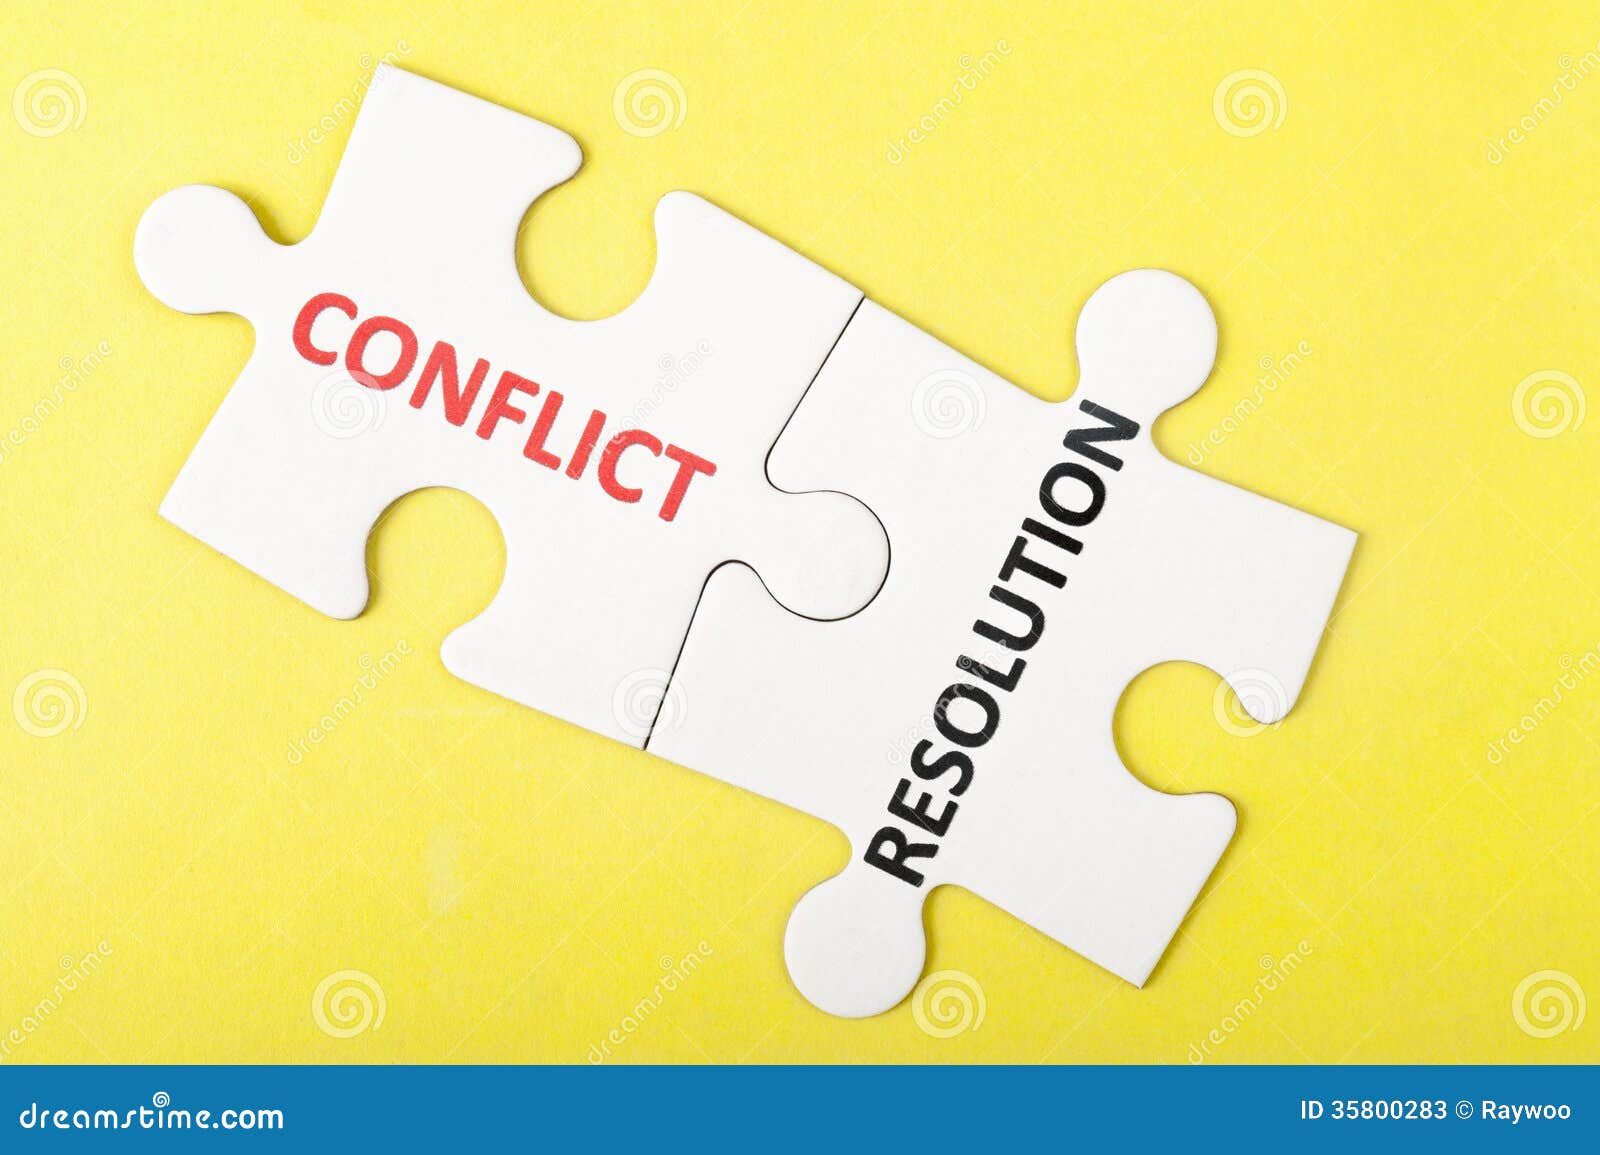 conflict and resolution words